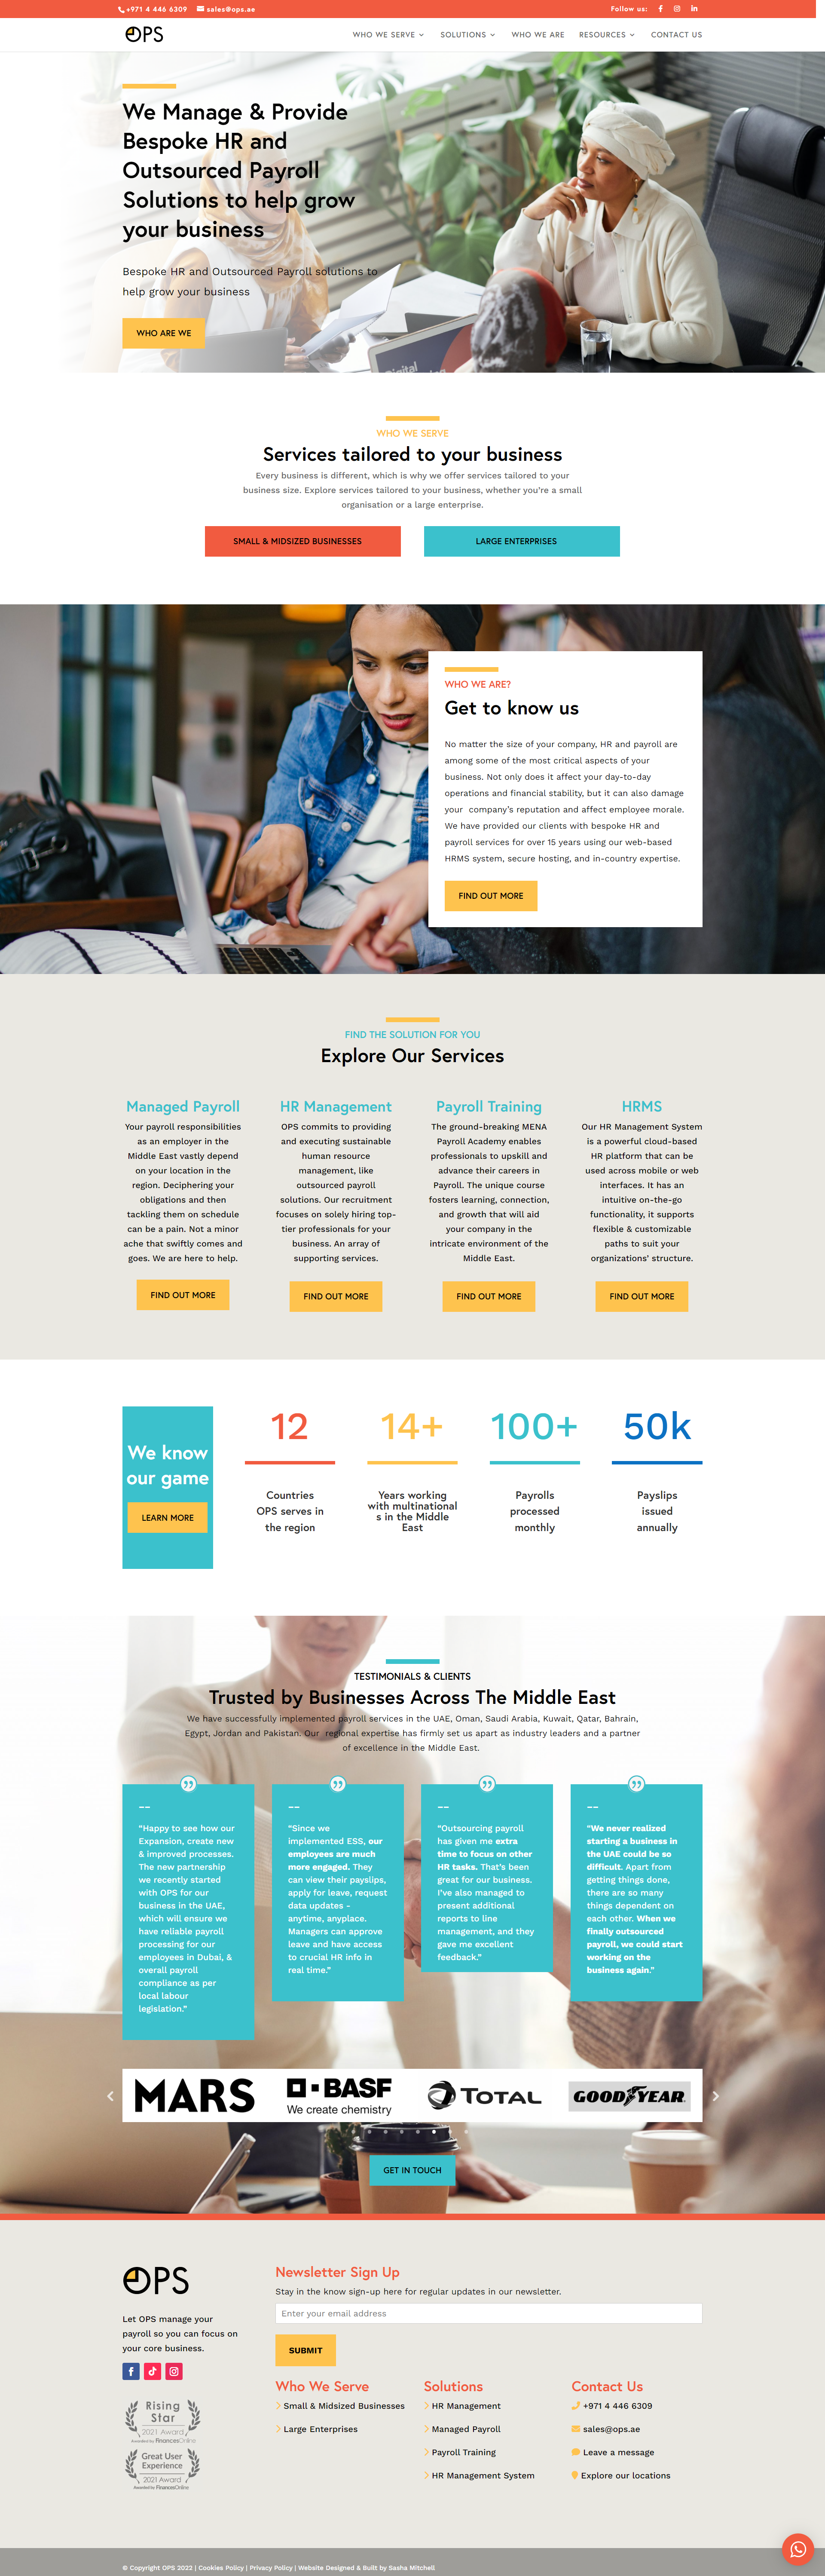 OPS Case Study Homepage